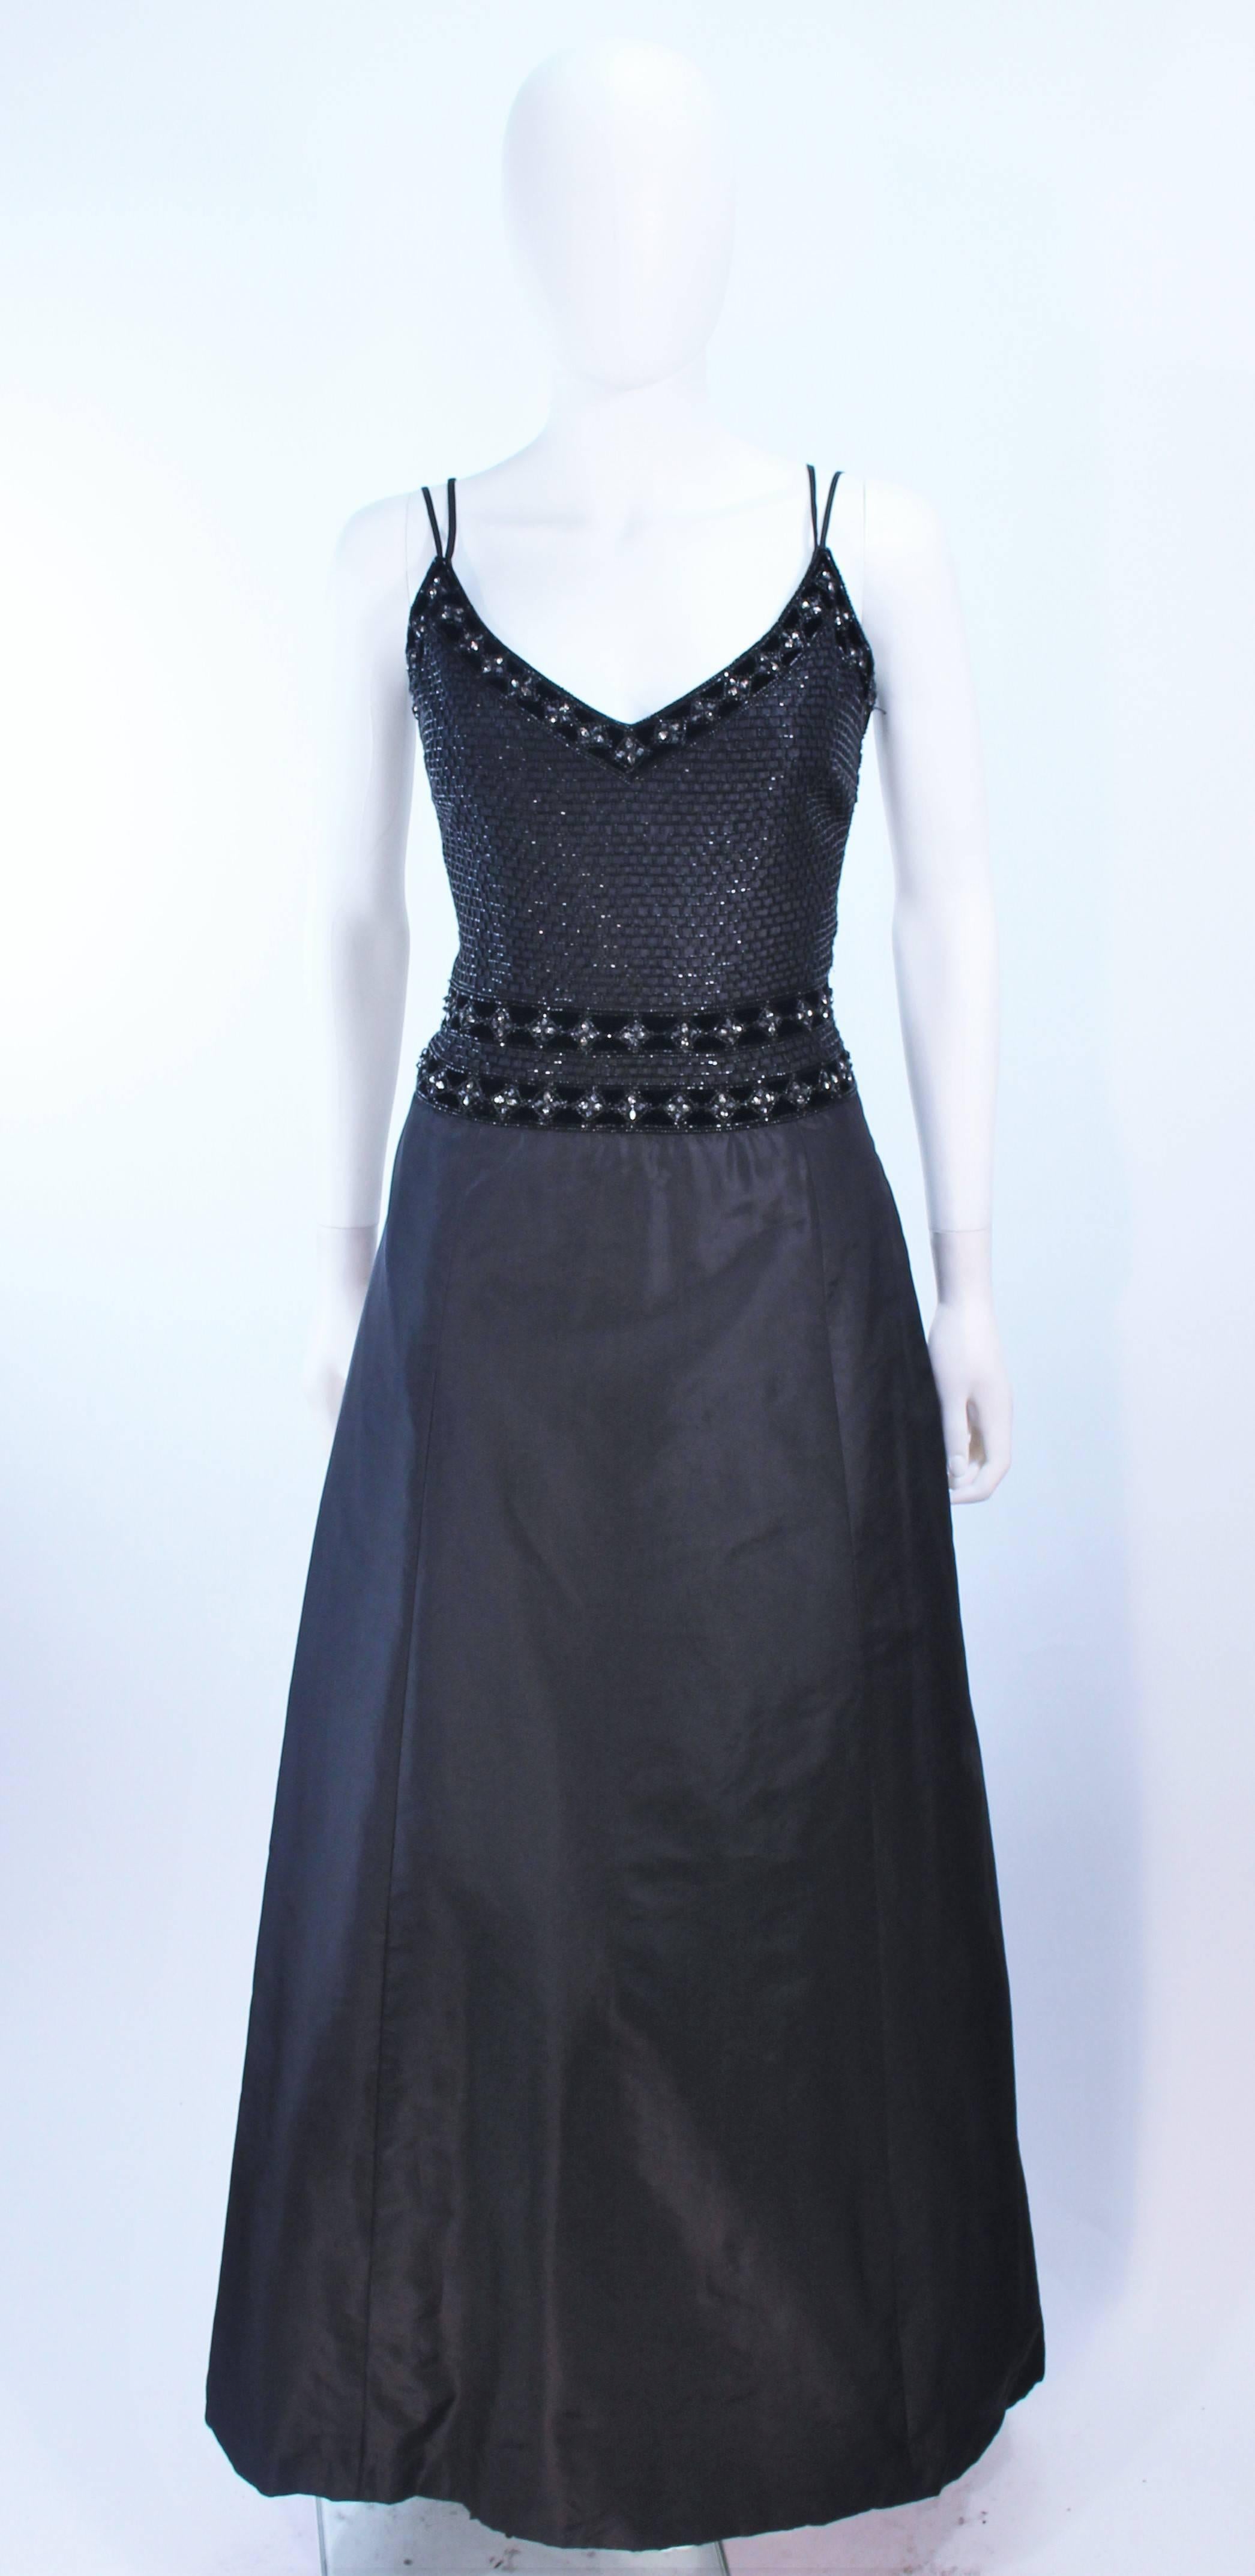 This Badgley Mischka gown is composed of a full satin skirt with beaded applique and rhinestones. There is a center back zipper closure. In excellent vintage condition. Shot with crinoline (not sold with gown).

**Please cross-reference